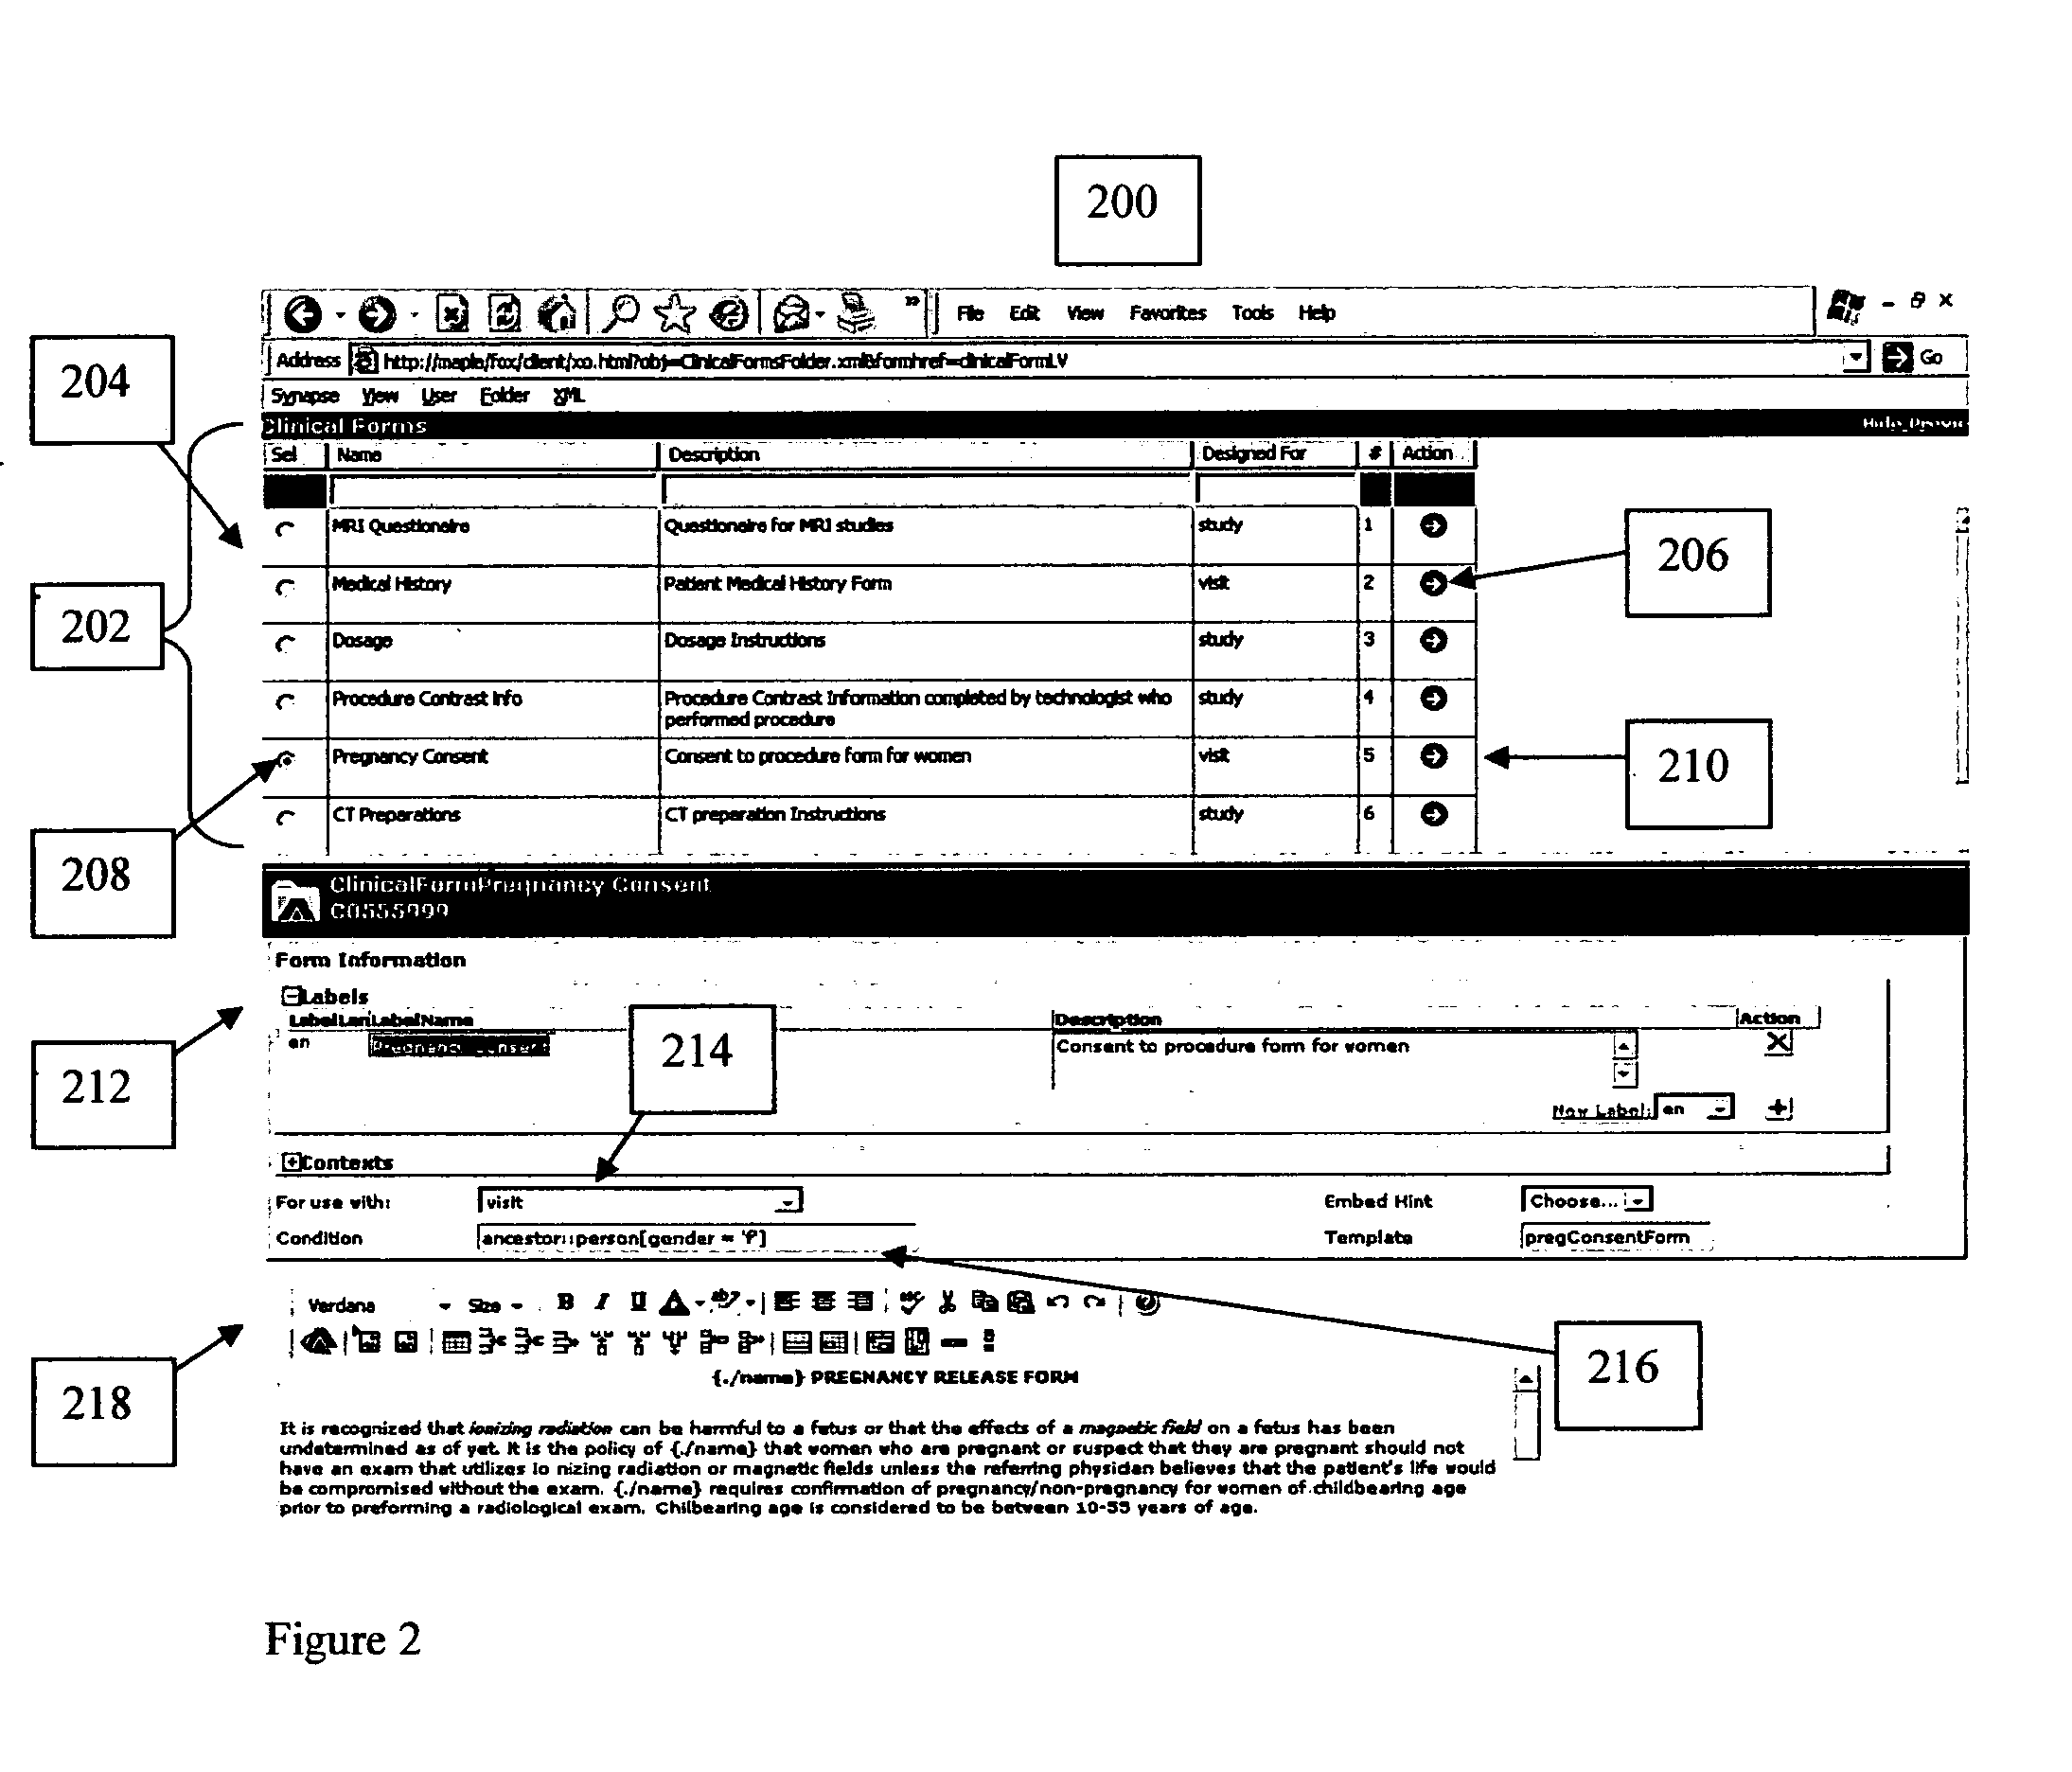 Method for communicating images and forms in a medical environment